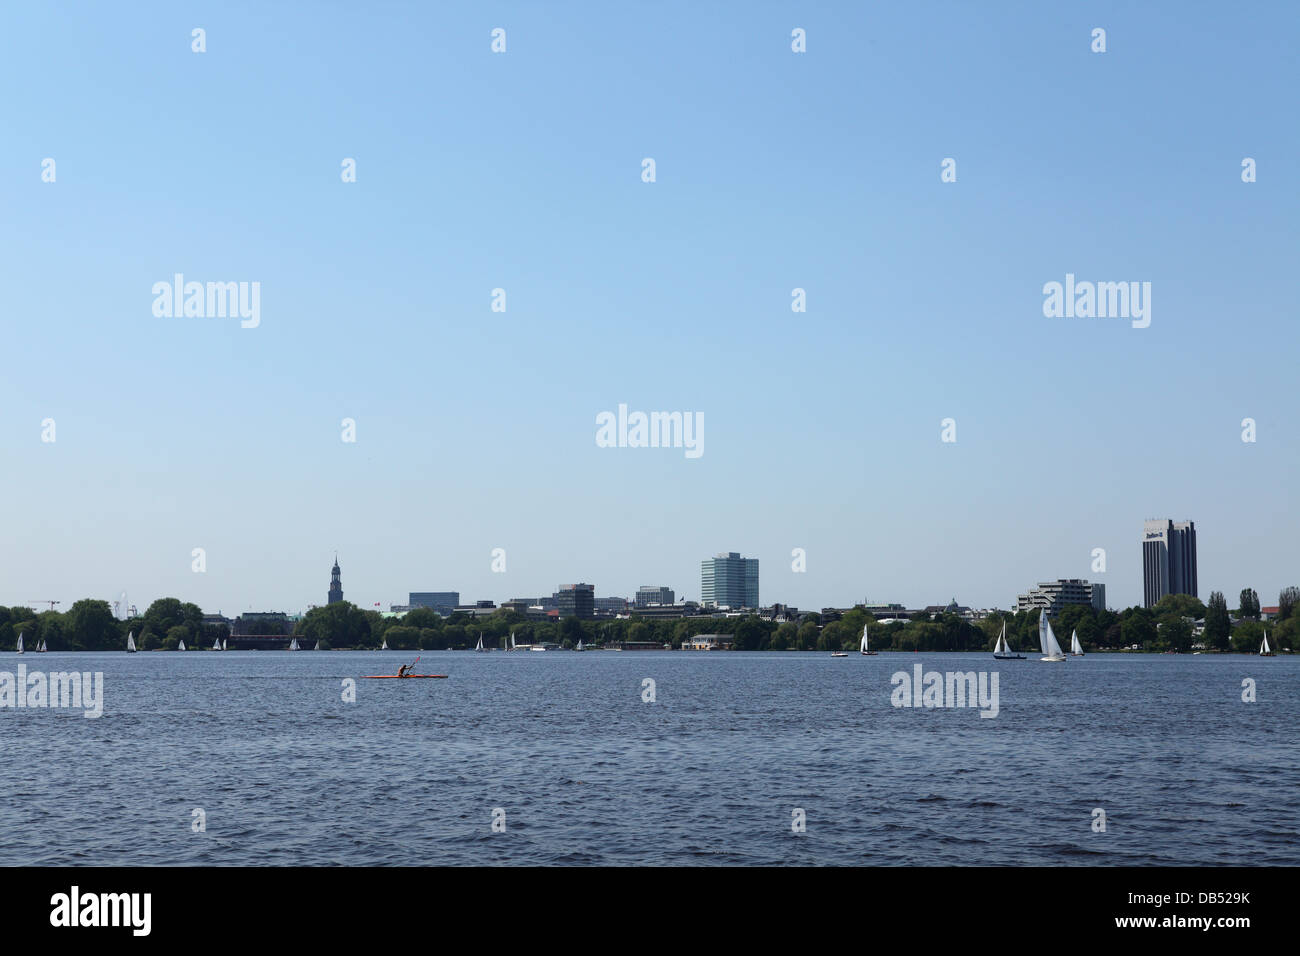 The Outer Alster lake (Aussenalster) in Hamburg, Germany. Stock Photo